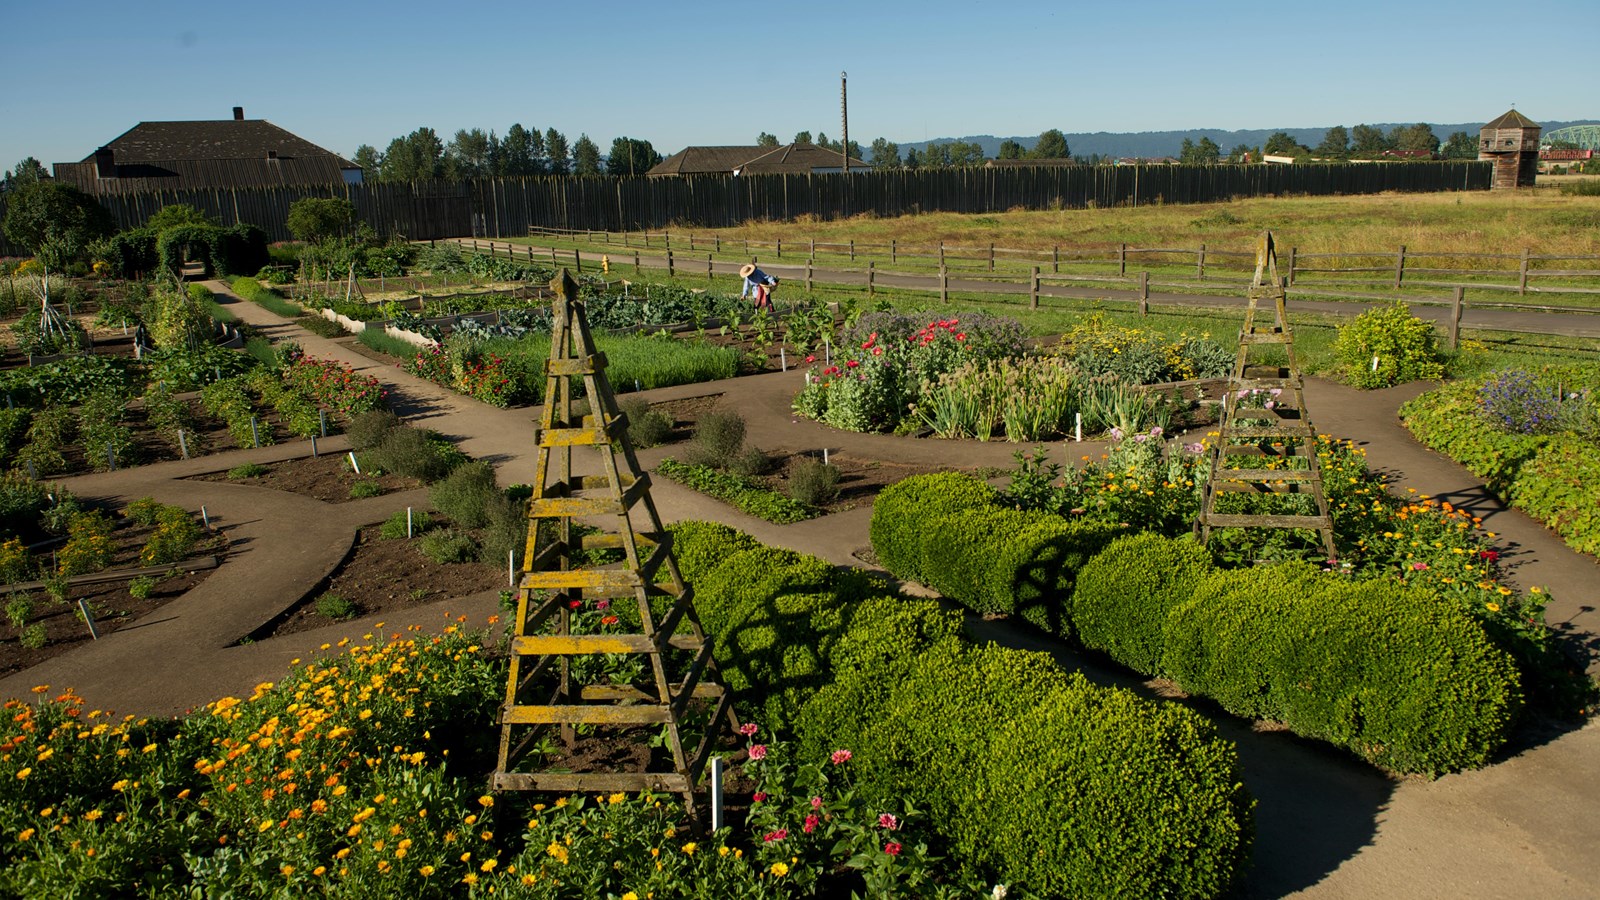 A lush garden with paved pathways. Fort Vancouver can be seen in the background.